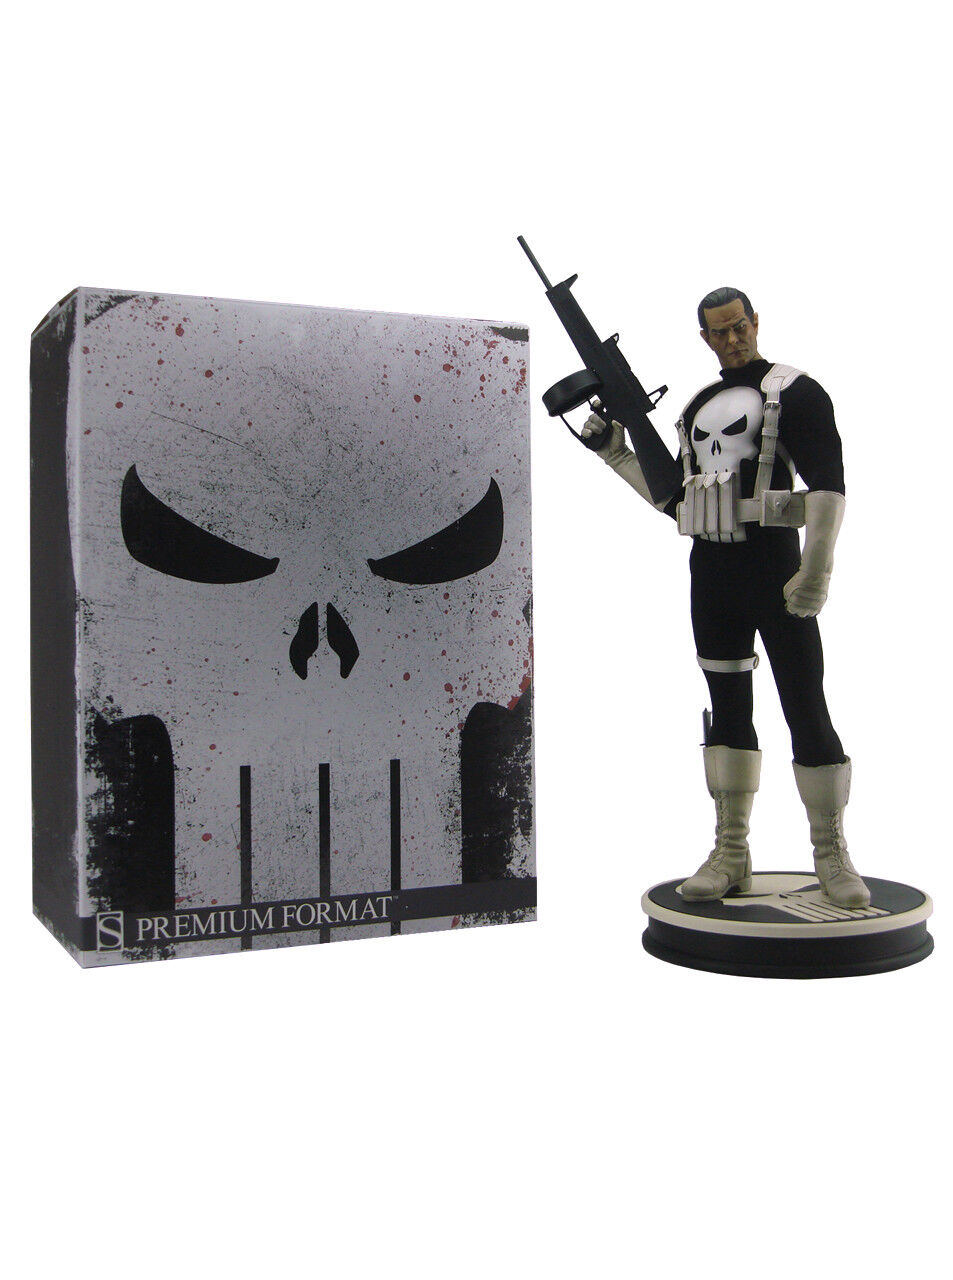 Sideshow Collectibles Punisher Statue Premium Format Figure Marvel Sample